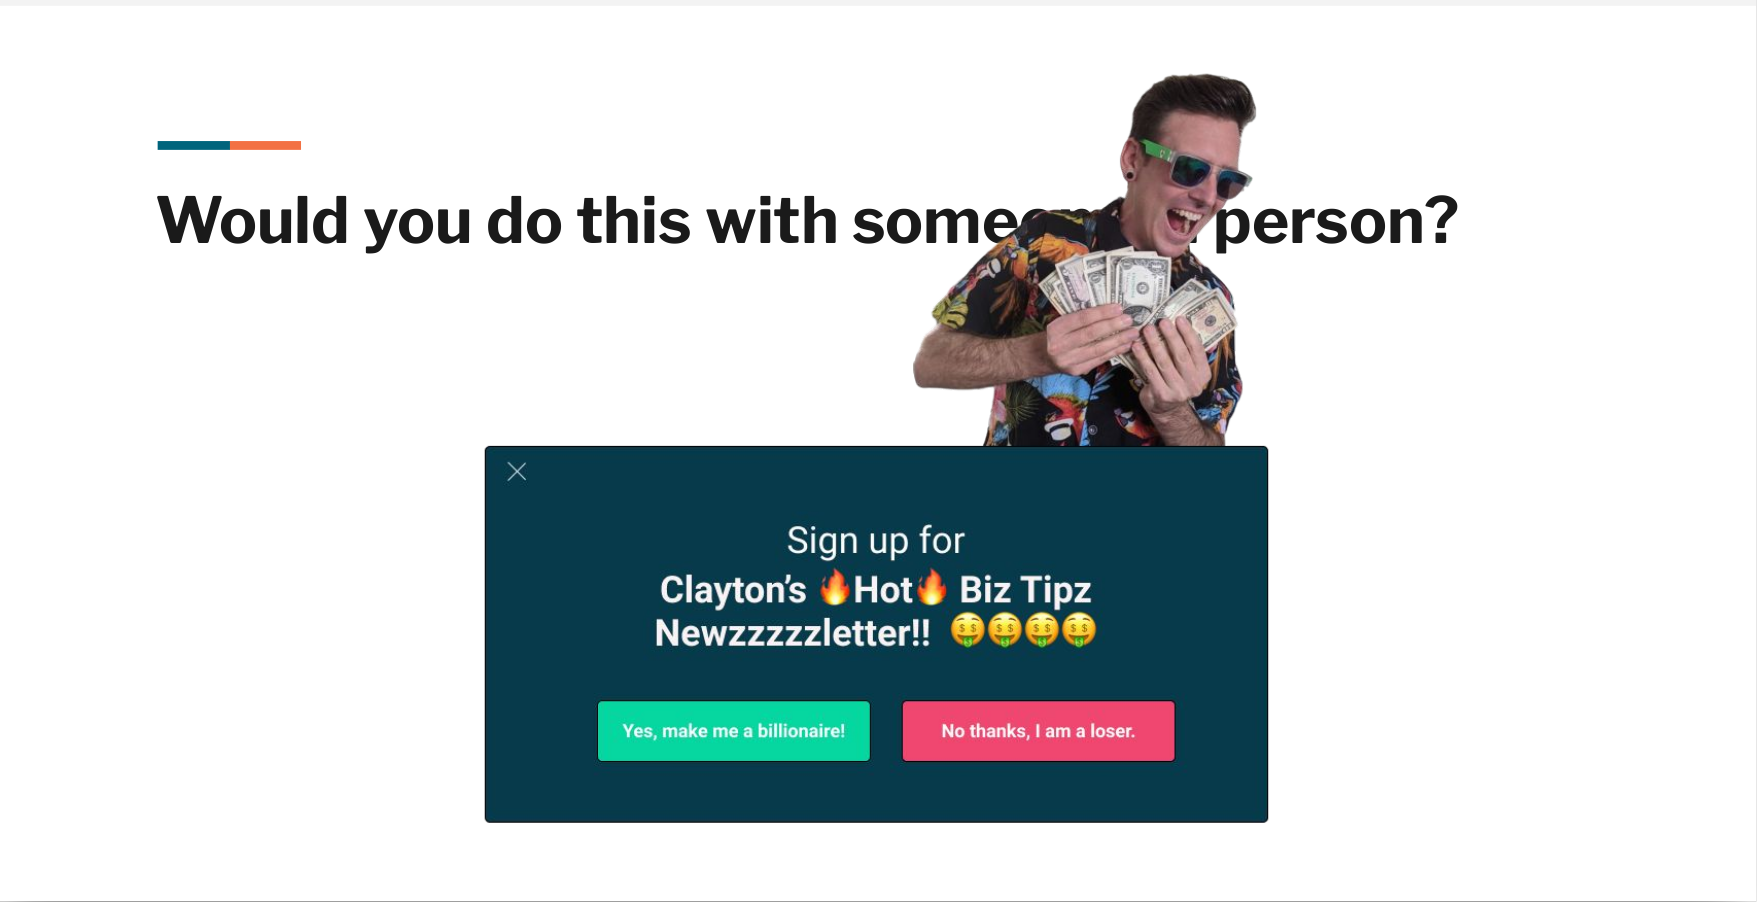 Clayton's Hot Biz Tips newsletter modal being bombastic and annoying.